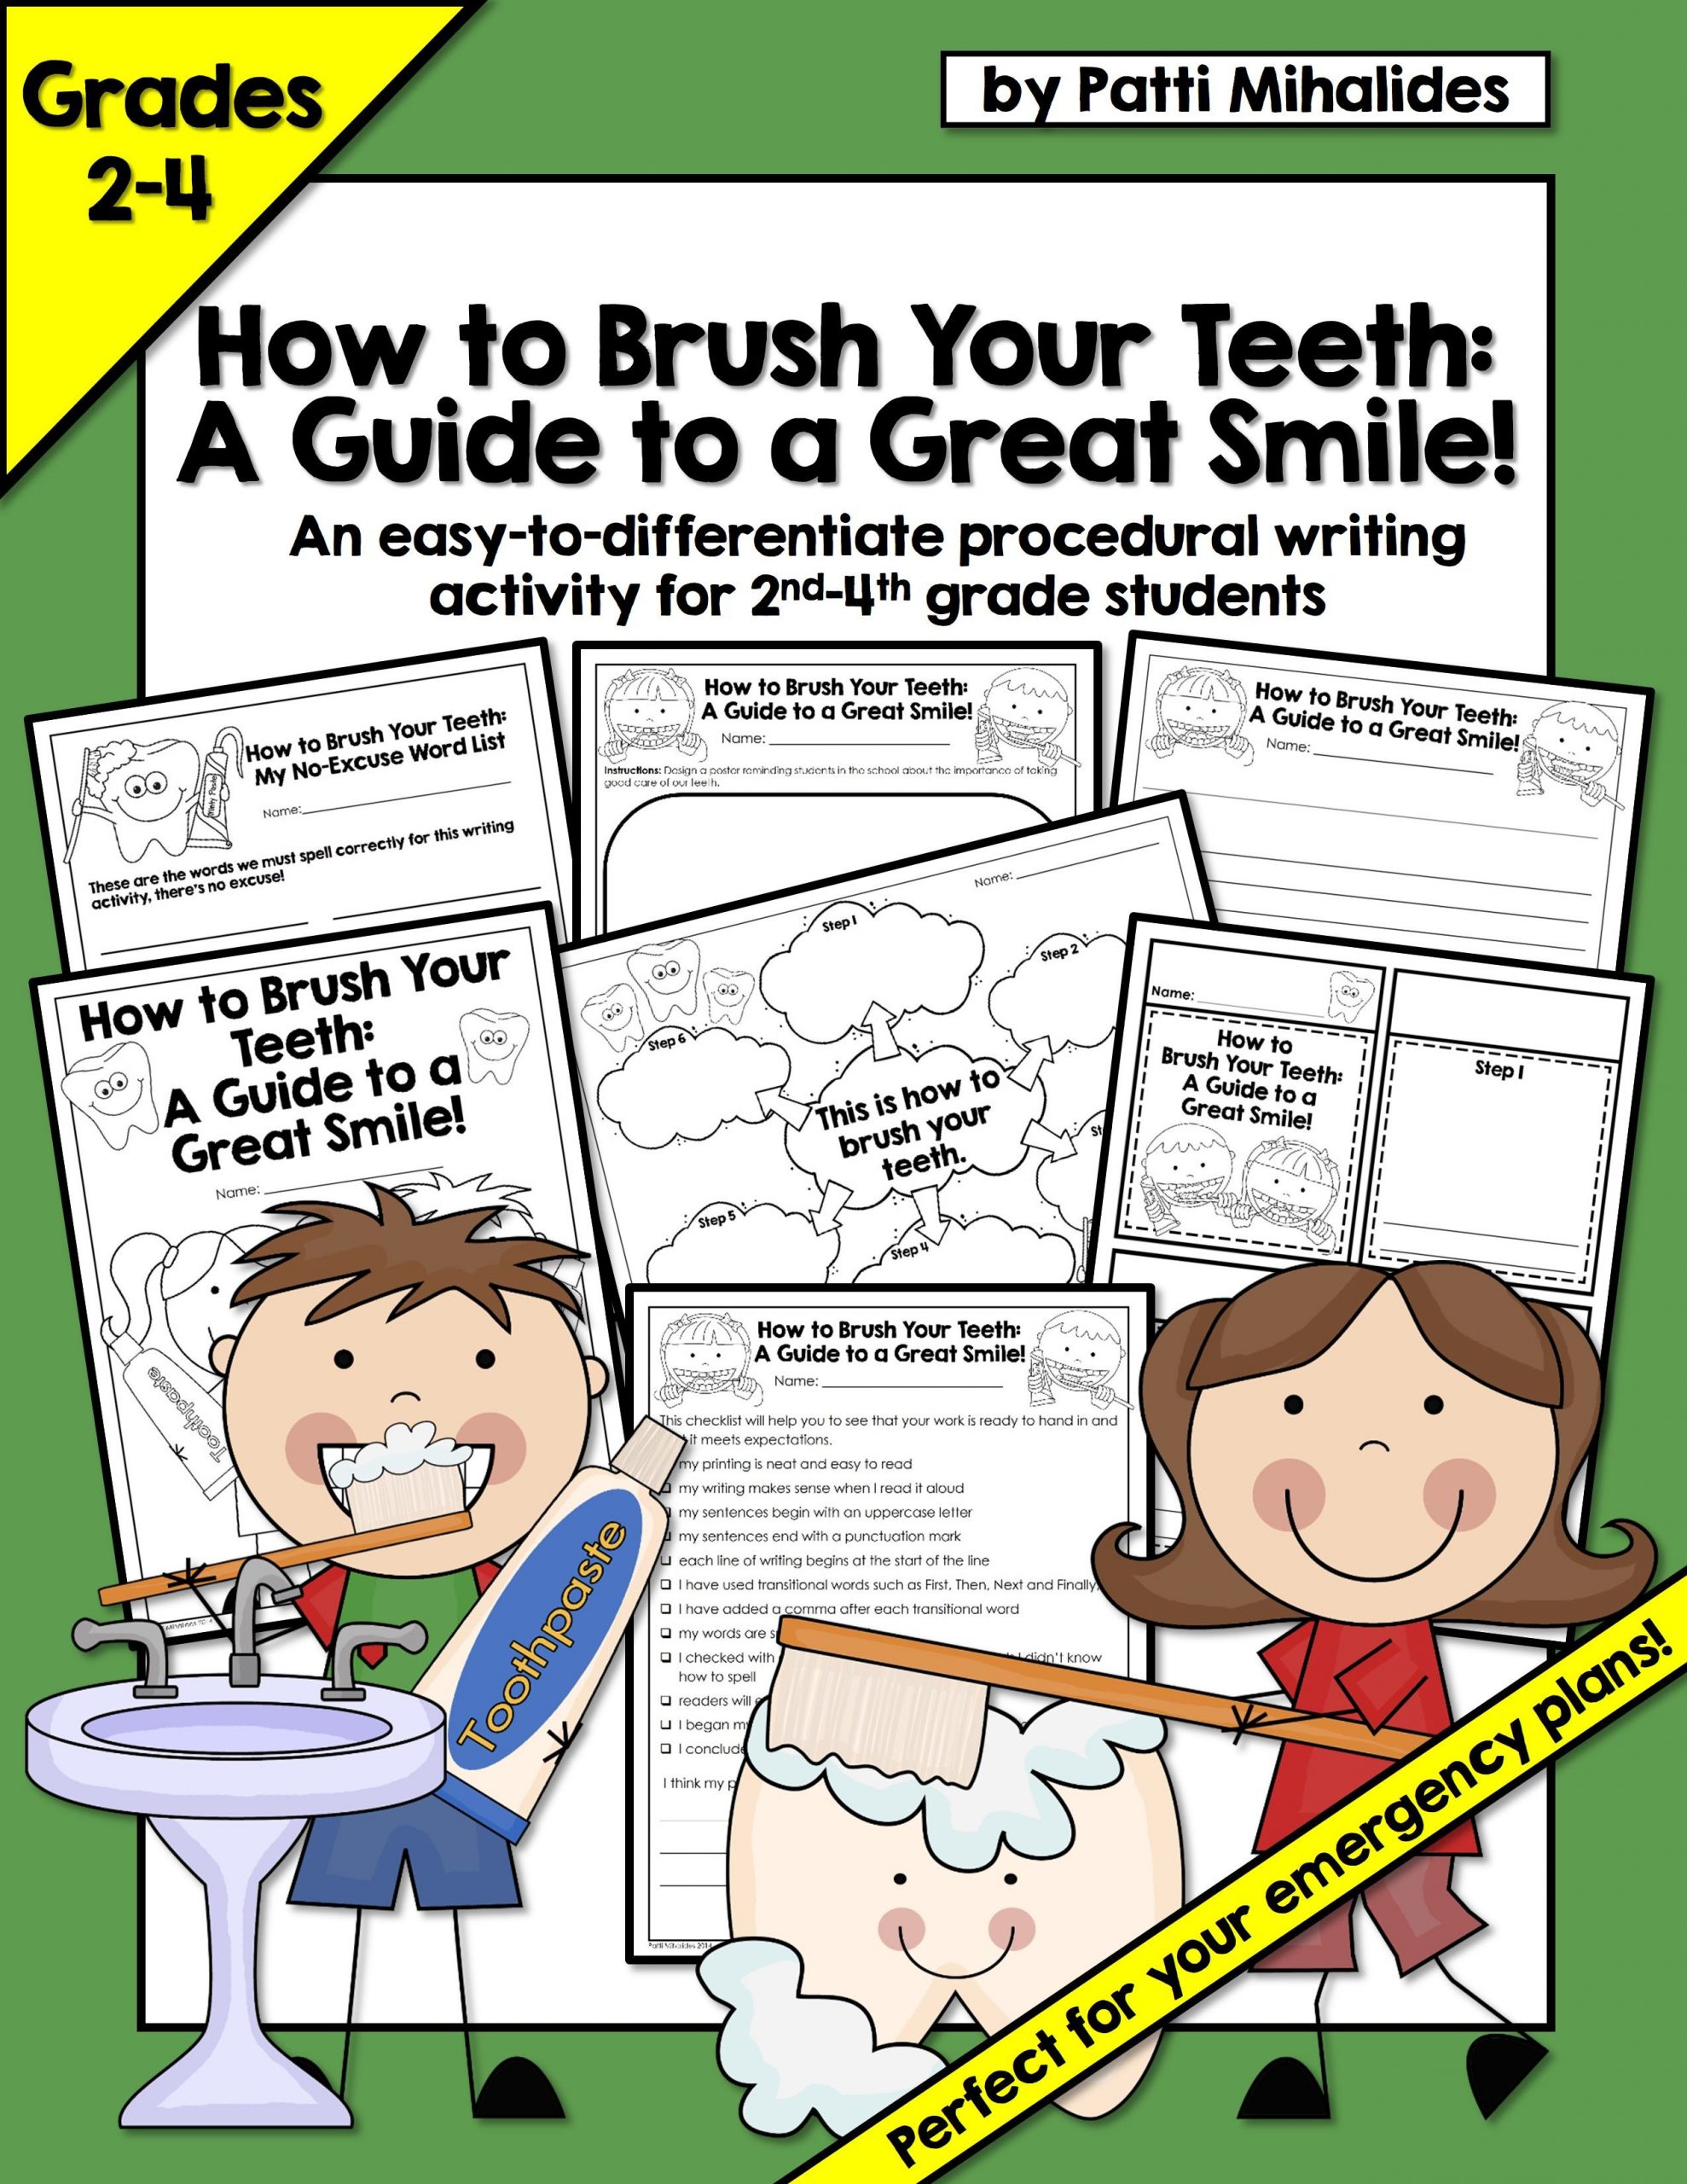 How To Brush Your Teeth: A Procedural Writing Activity For